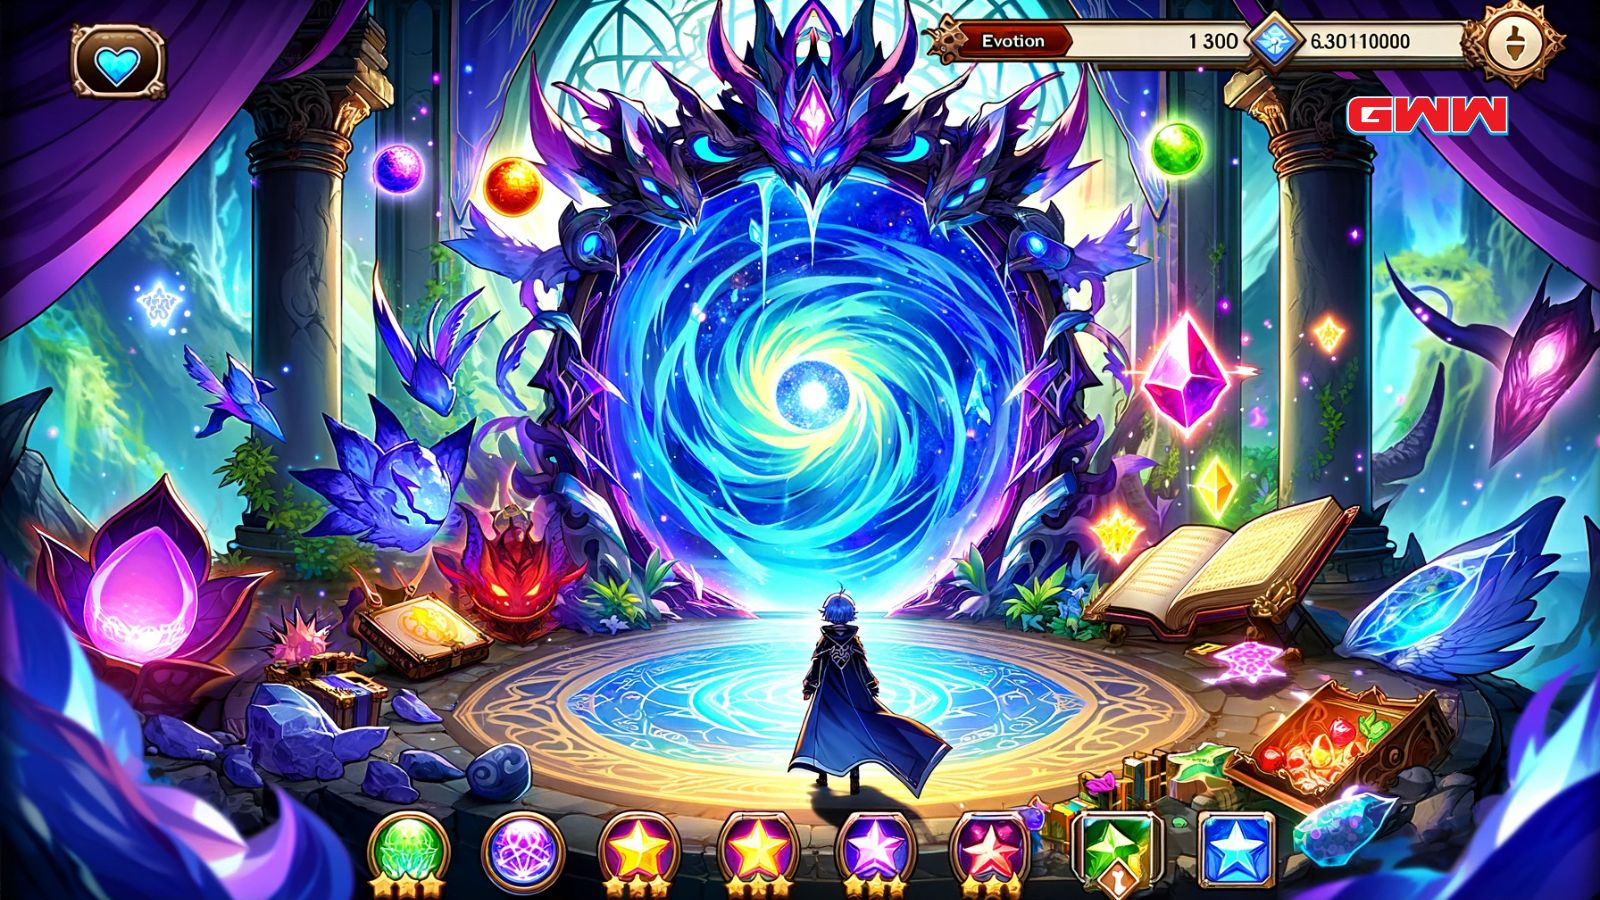 Merlin at a magical portal gathering items, how to get Merlin Anime Adventures